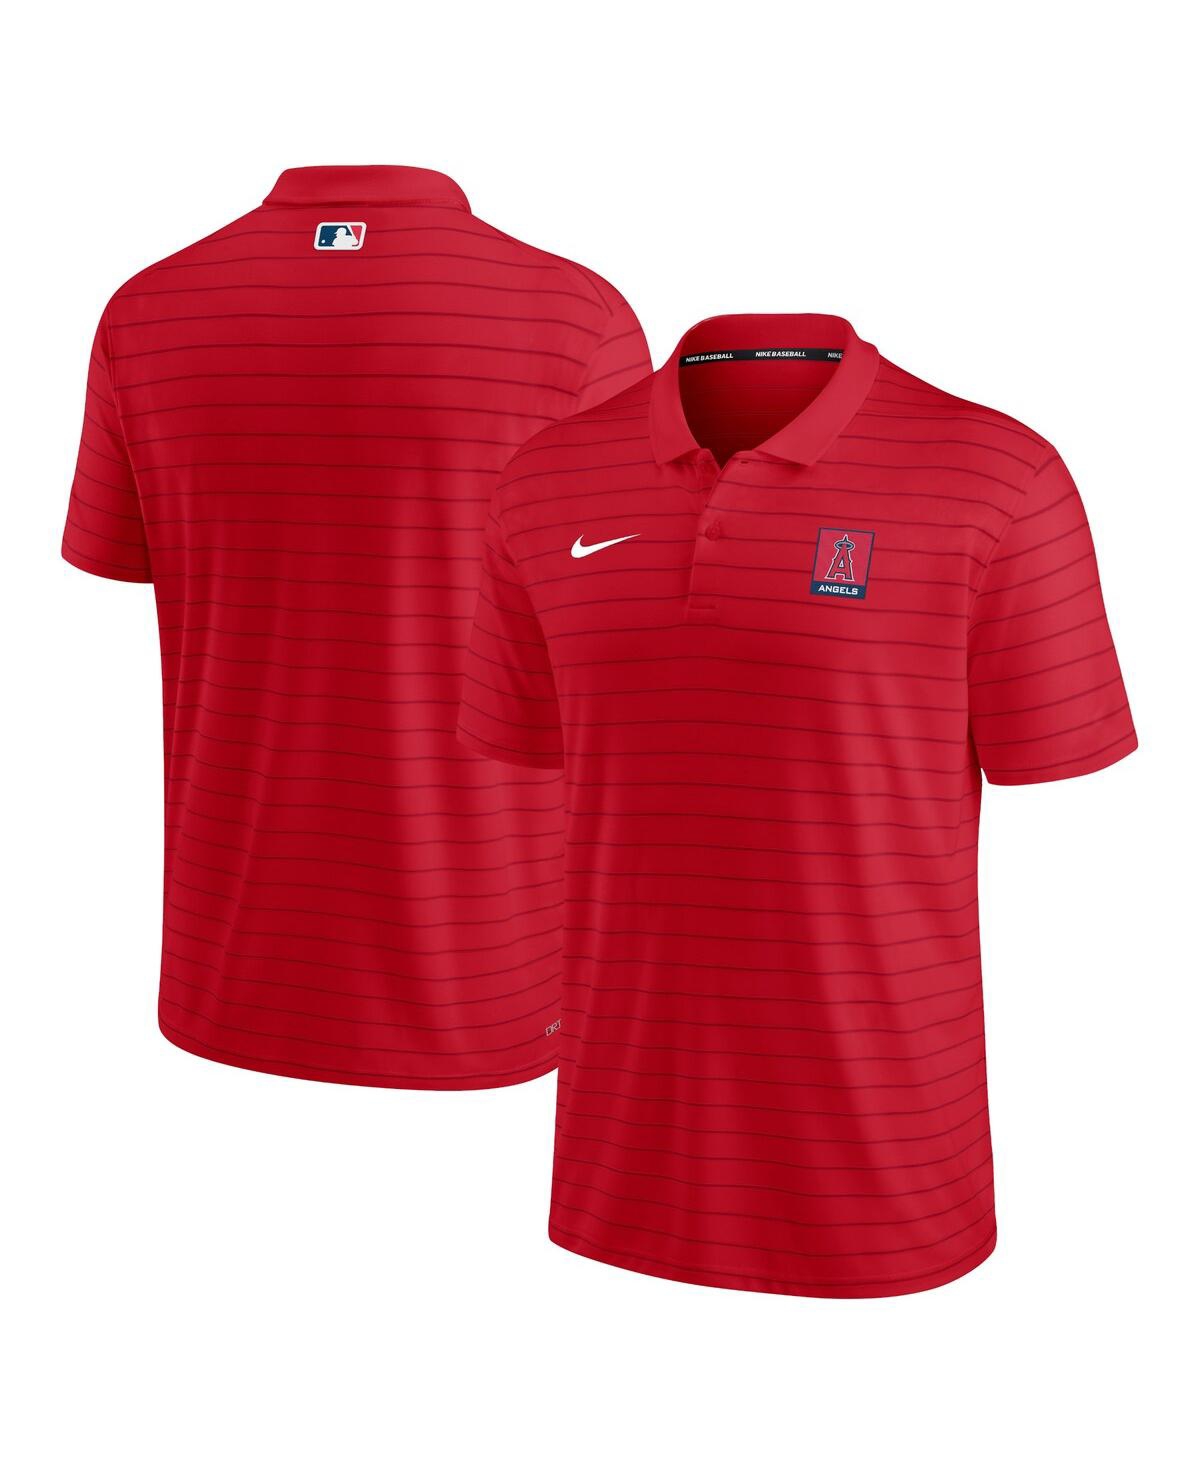 Shop Nike Men's  Red Los Angeles Angels Authentic Collection Striped Performance Pique Polo Shirt